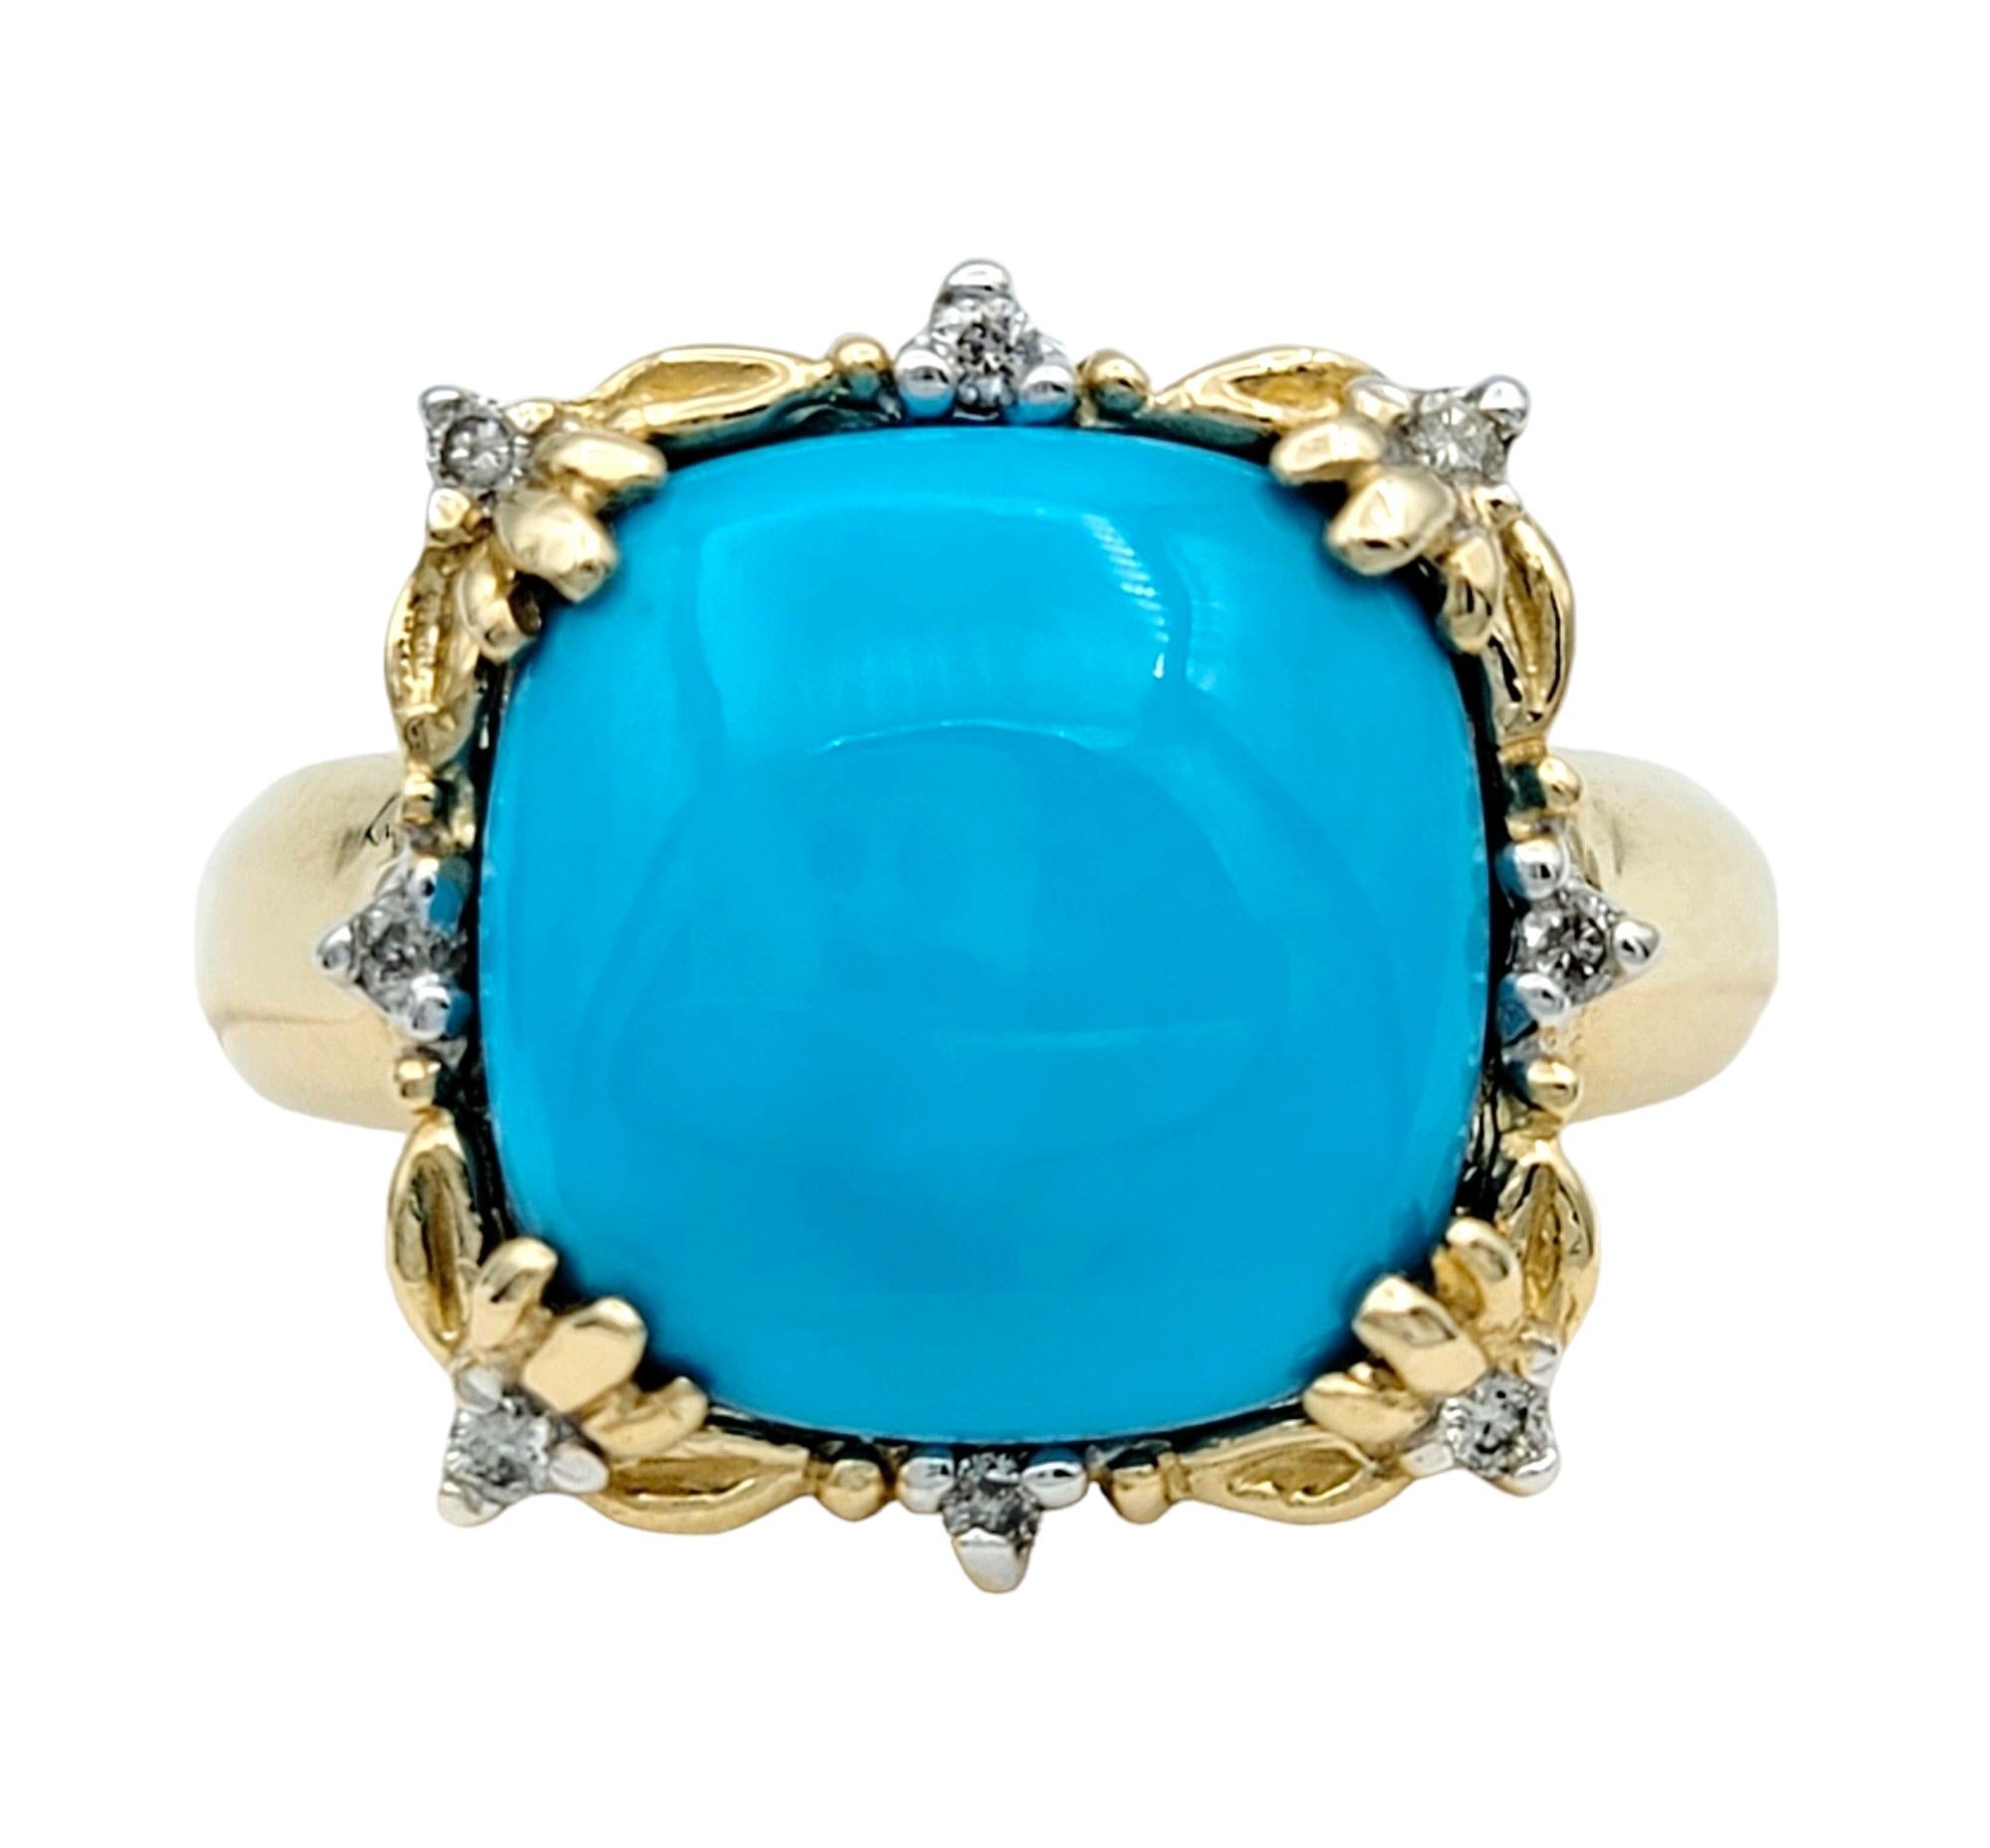 Ring Size: 7

This beautiful cushion cut turquoise stone ring with a framed design and small diamond accents is a stunning piece that beautifully blends elegance with a touch of bohemian charm. At the heart of the ring is a captivating cushion-cut